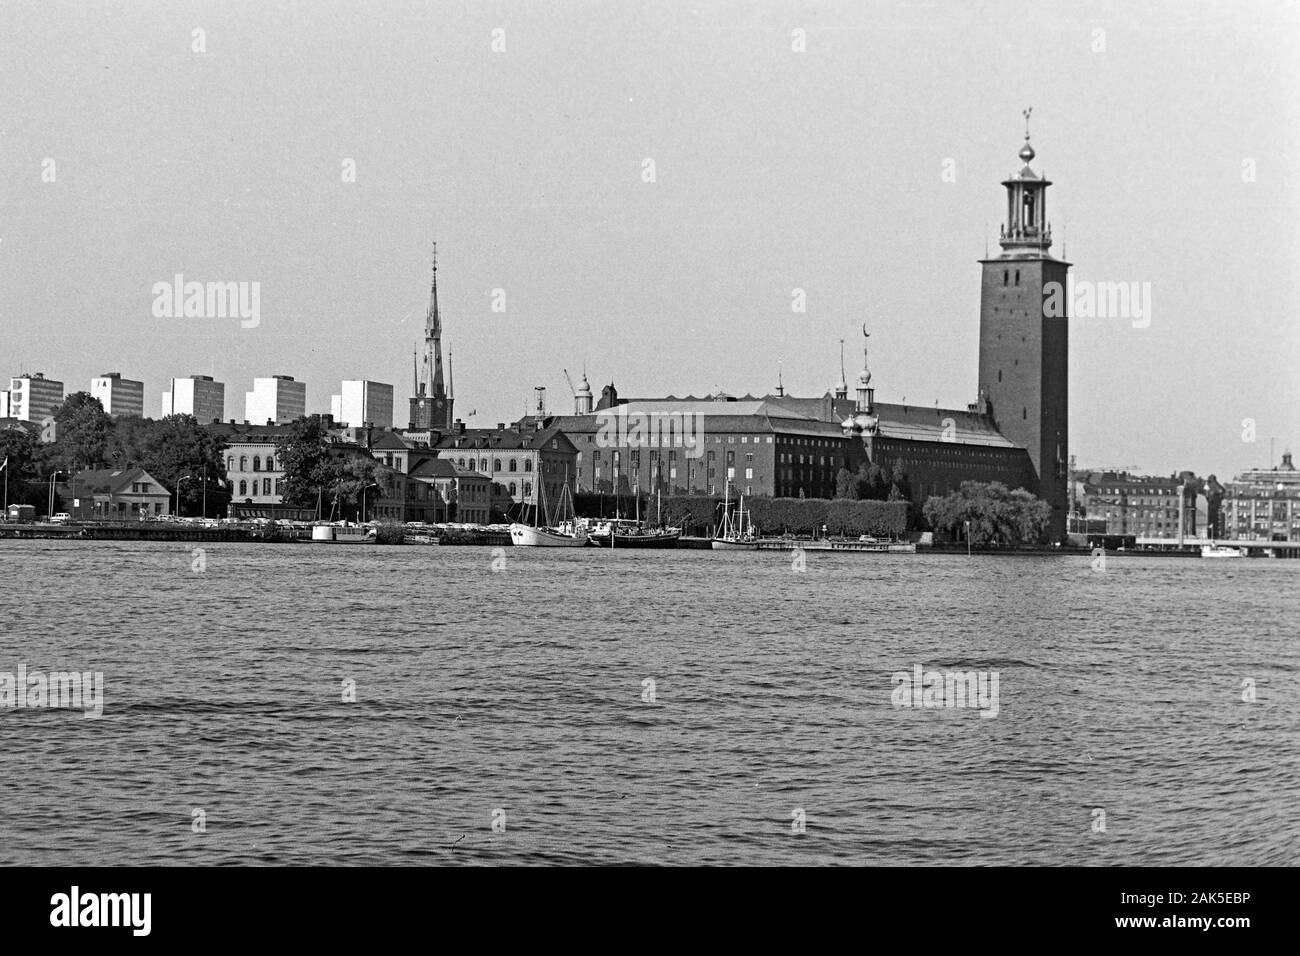 Blick aus dem Tourboot auf das Stadshuset, 1969. View of Stockholm's Stadshuset out of a sightseeing boat, 1969. Stock Photo